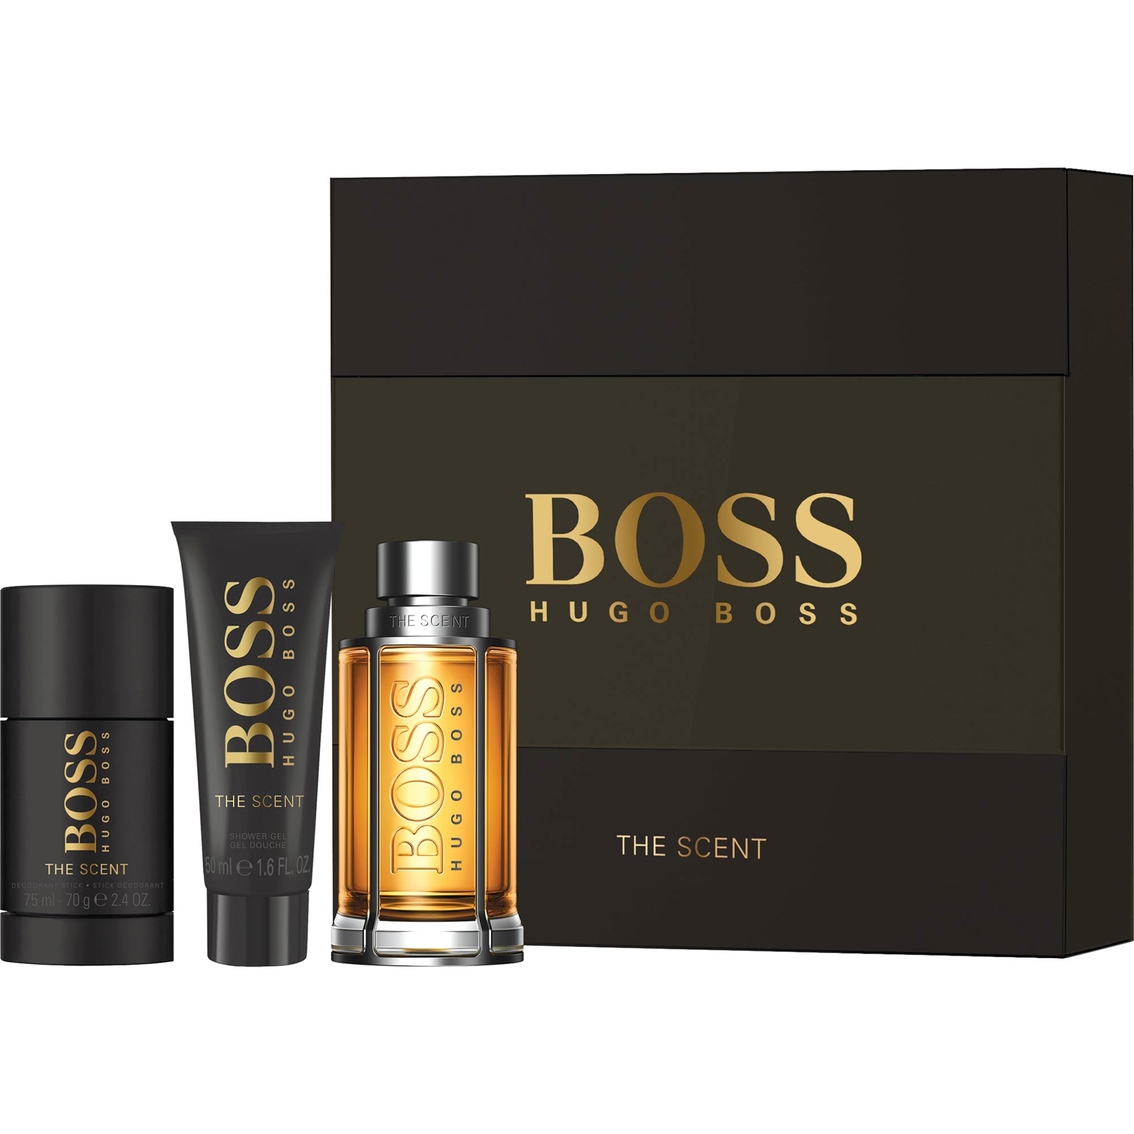 Hugo Boss The Scent Gift Set | Gifts Sets For Him | Beauty & Health ...